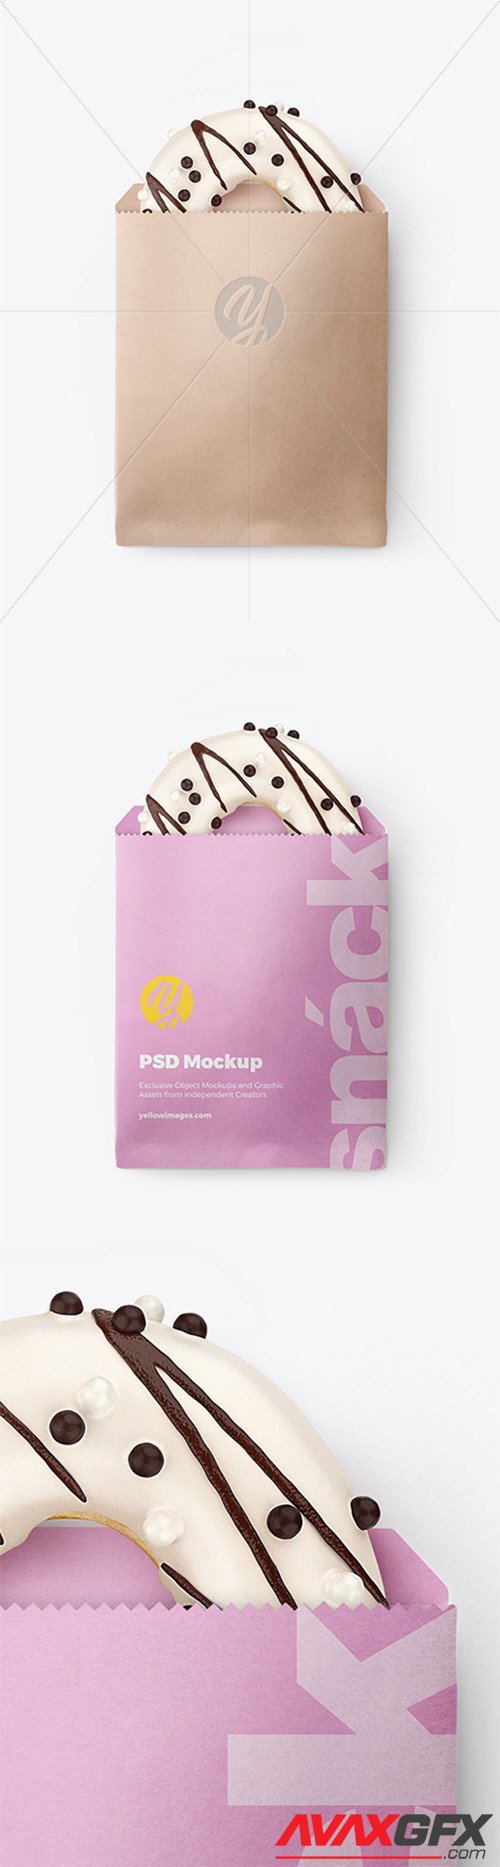 Download Yellowimages Mockups Glossy Paper Cement Bag Psd Mockup Png Yellowimages Mockups